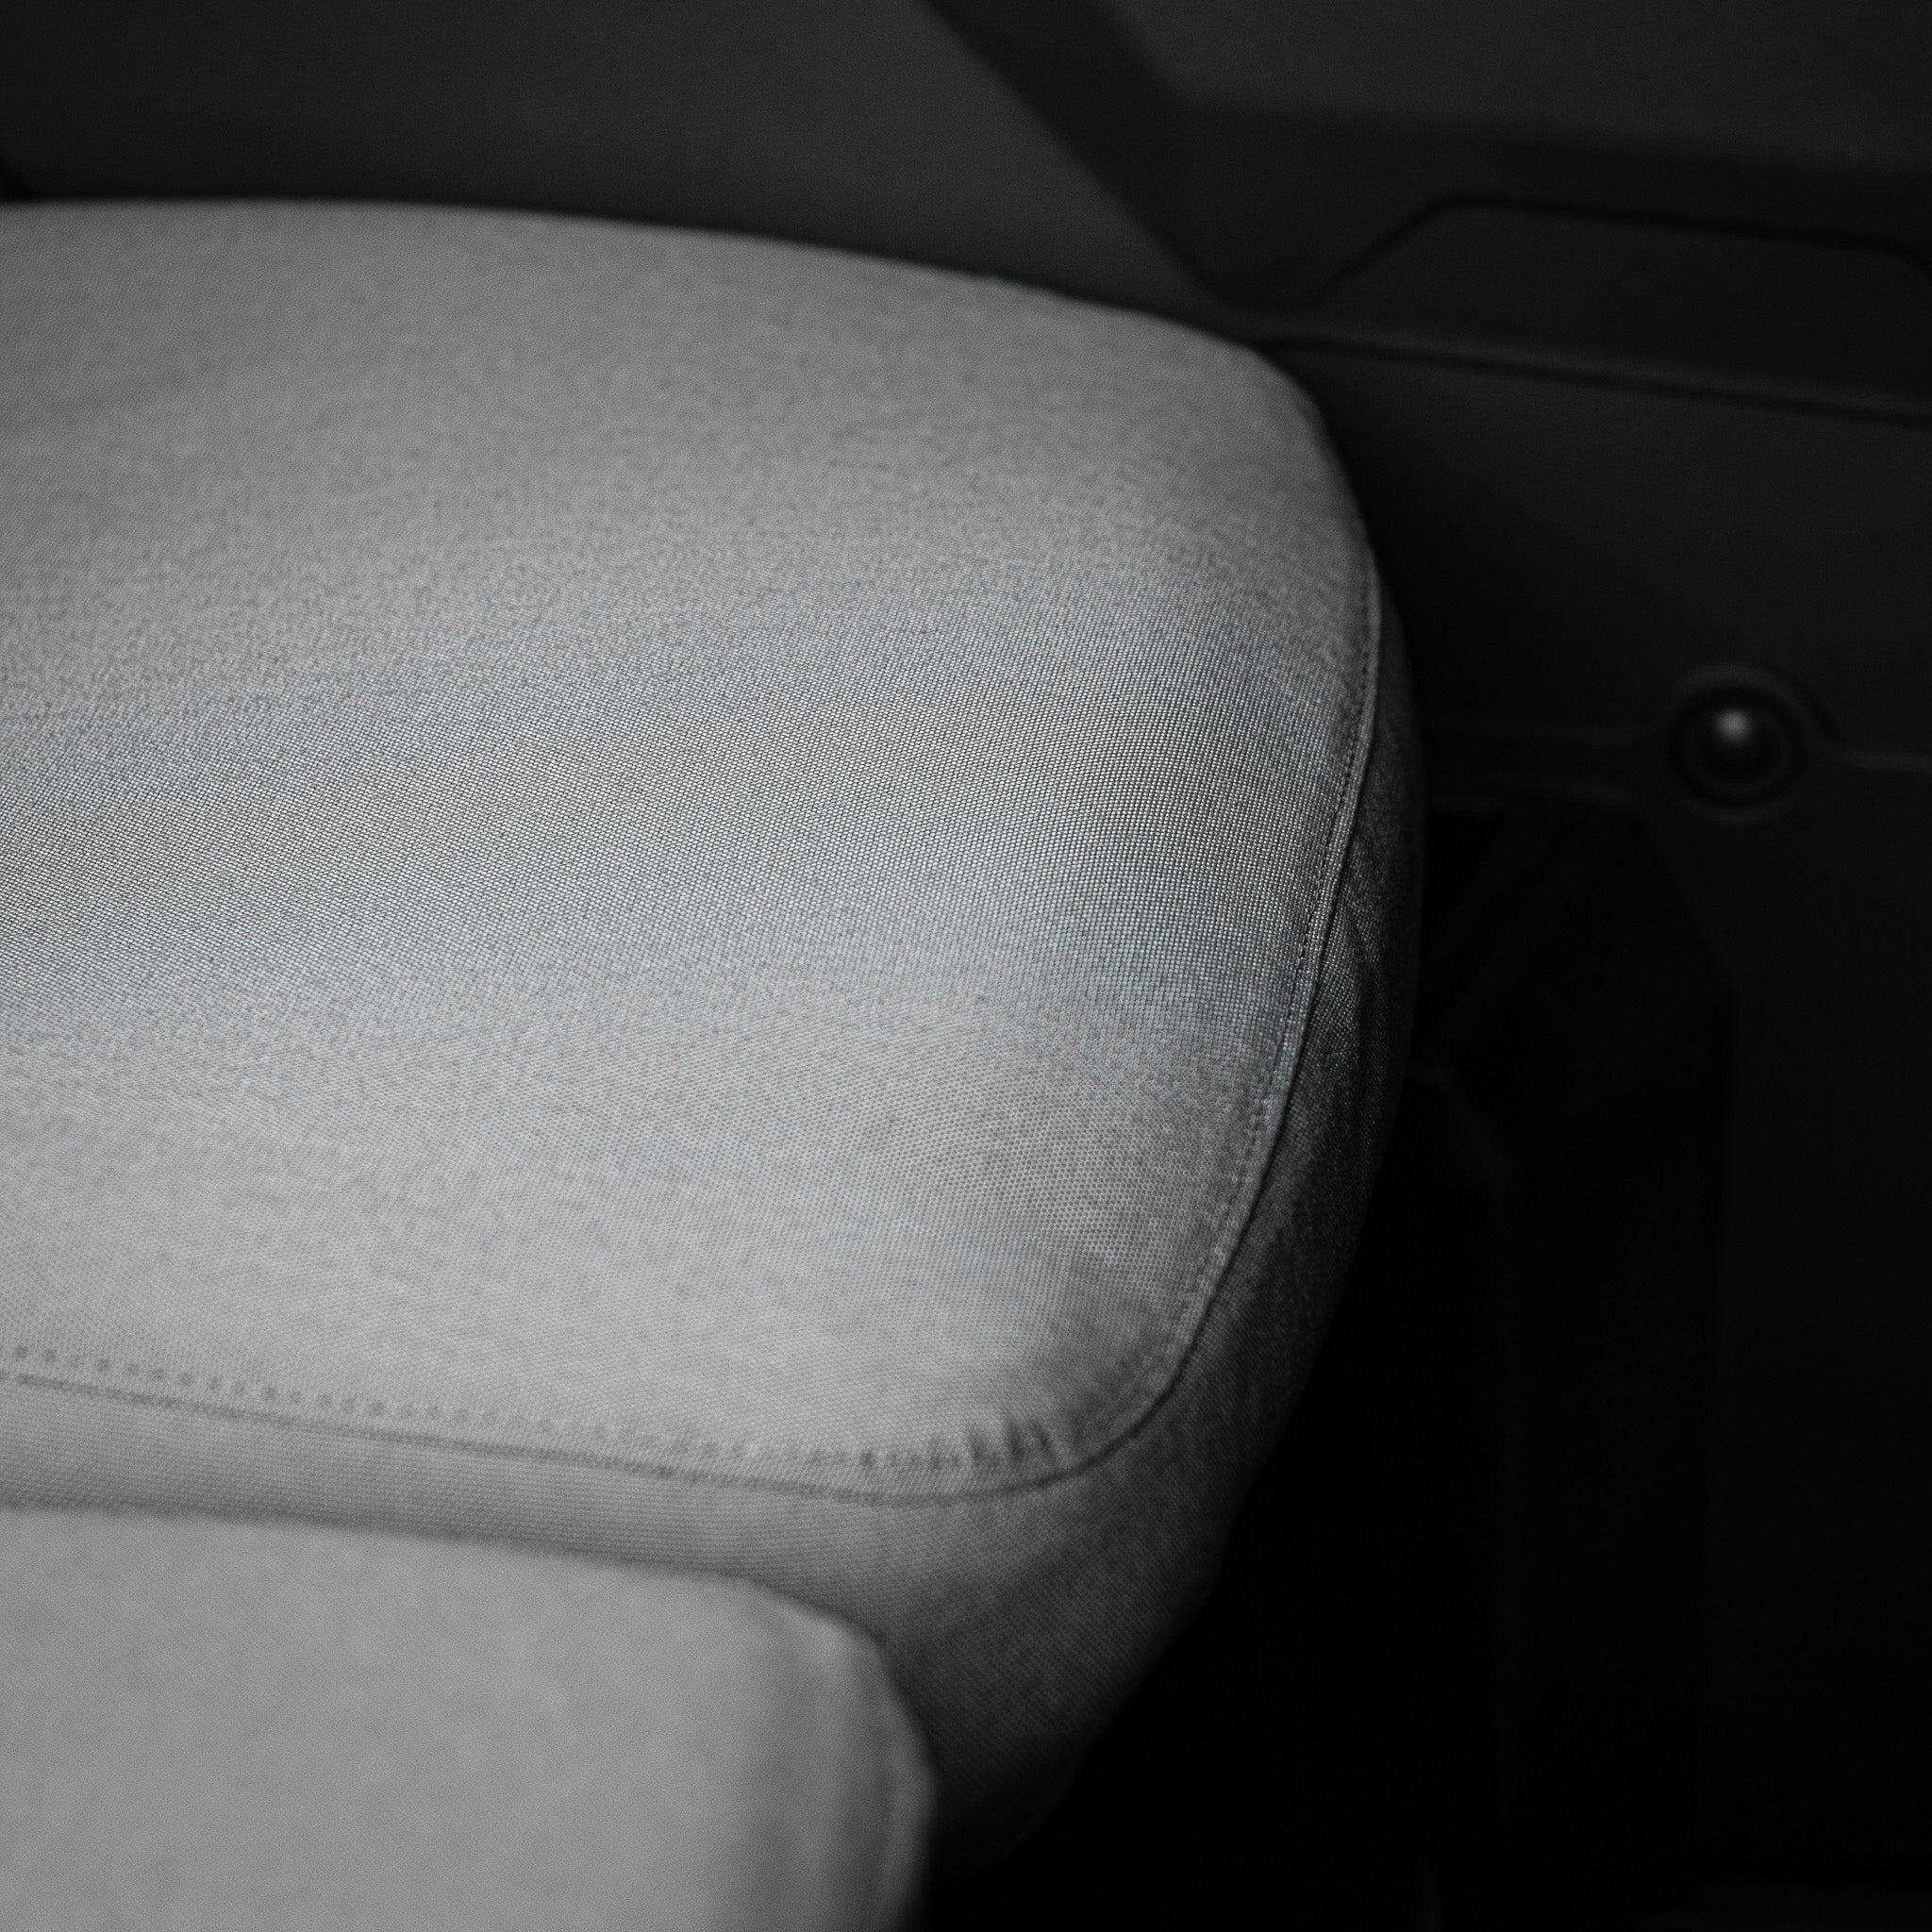 A photo showing the seat bottom piece of the Polaris Ranger seat cover set. The covers are built from 1000 denier Cordura, which is a supple but extremely durable fabric.